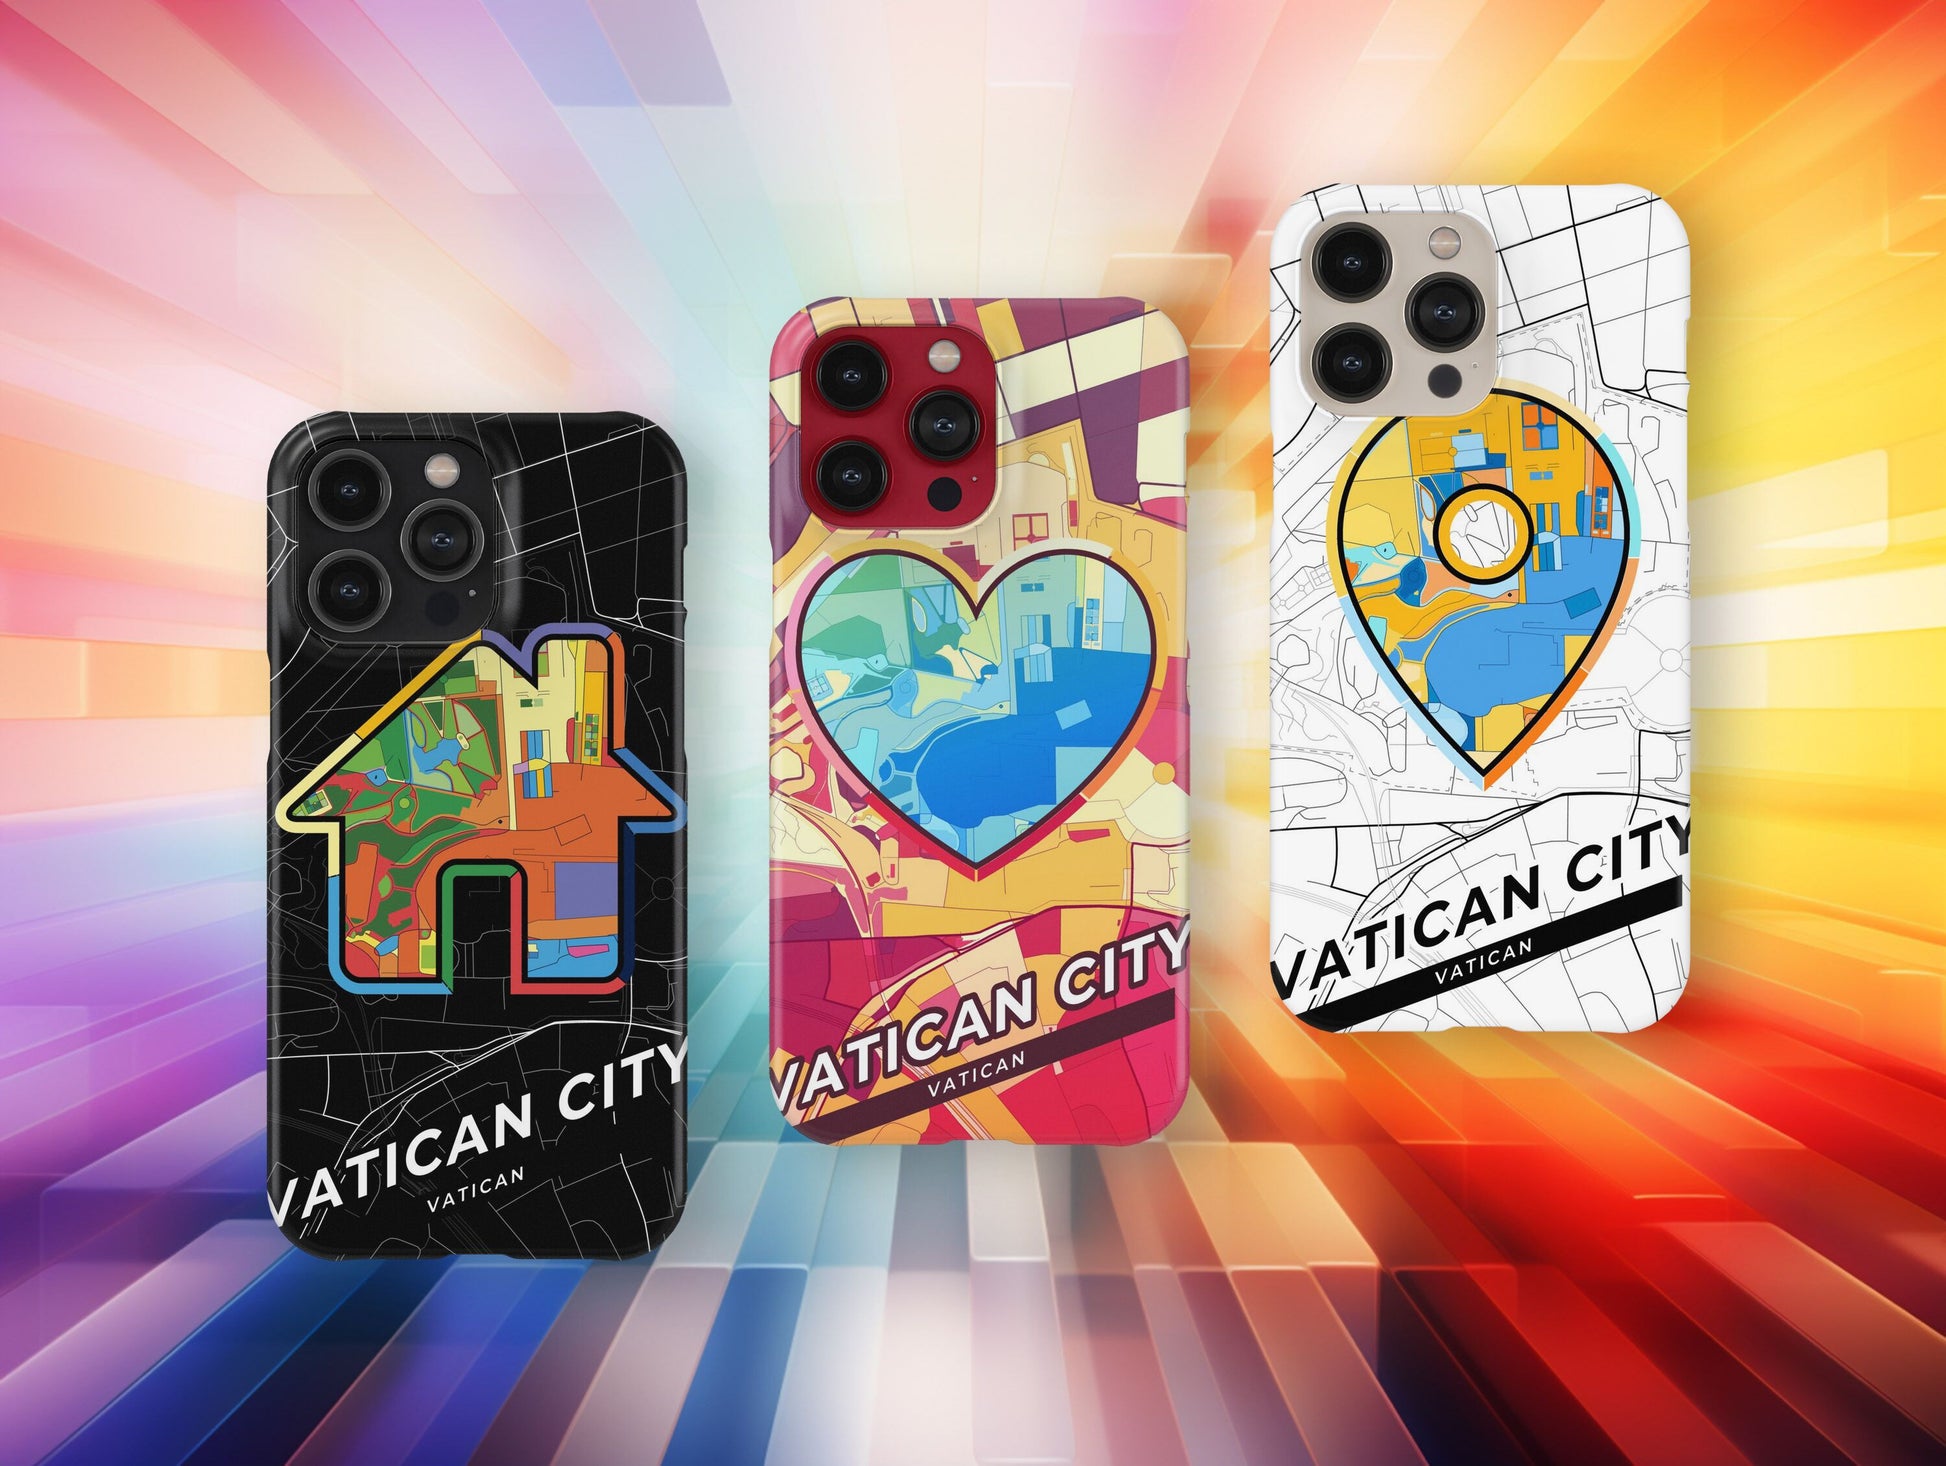 Vatican City Vatican slim phone case with colorful icon